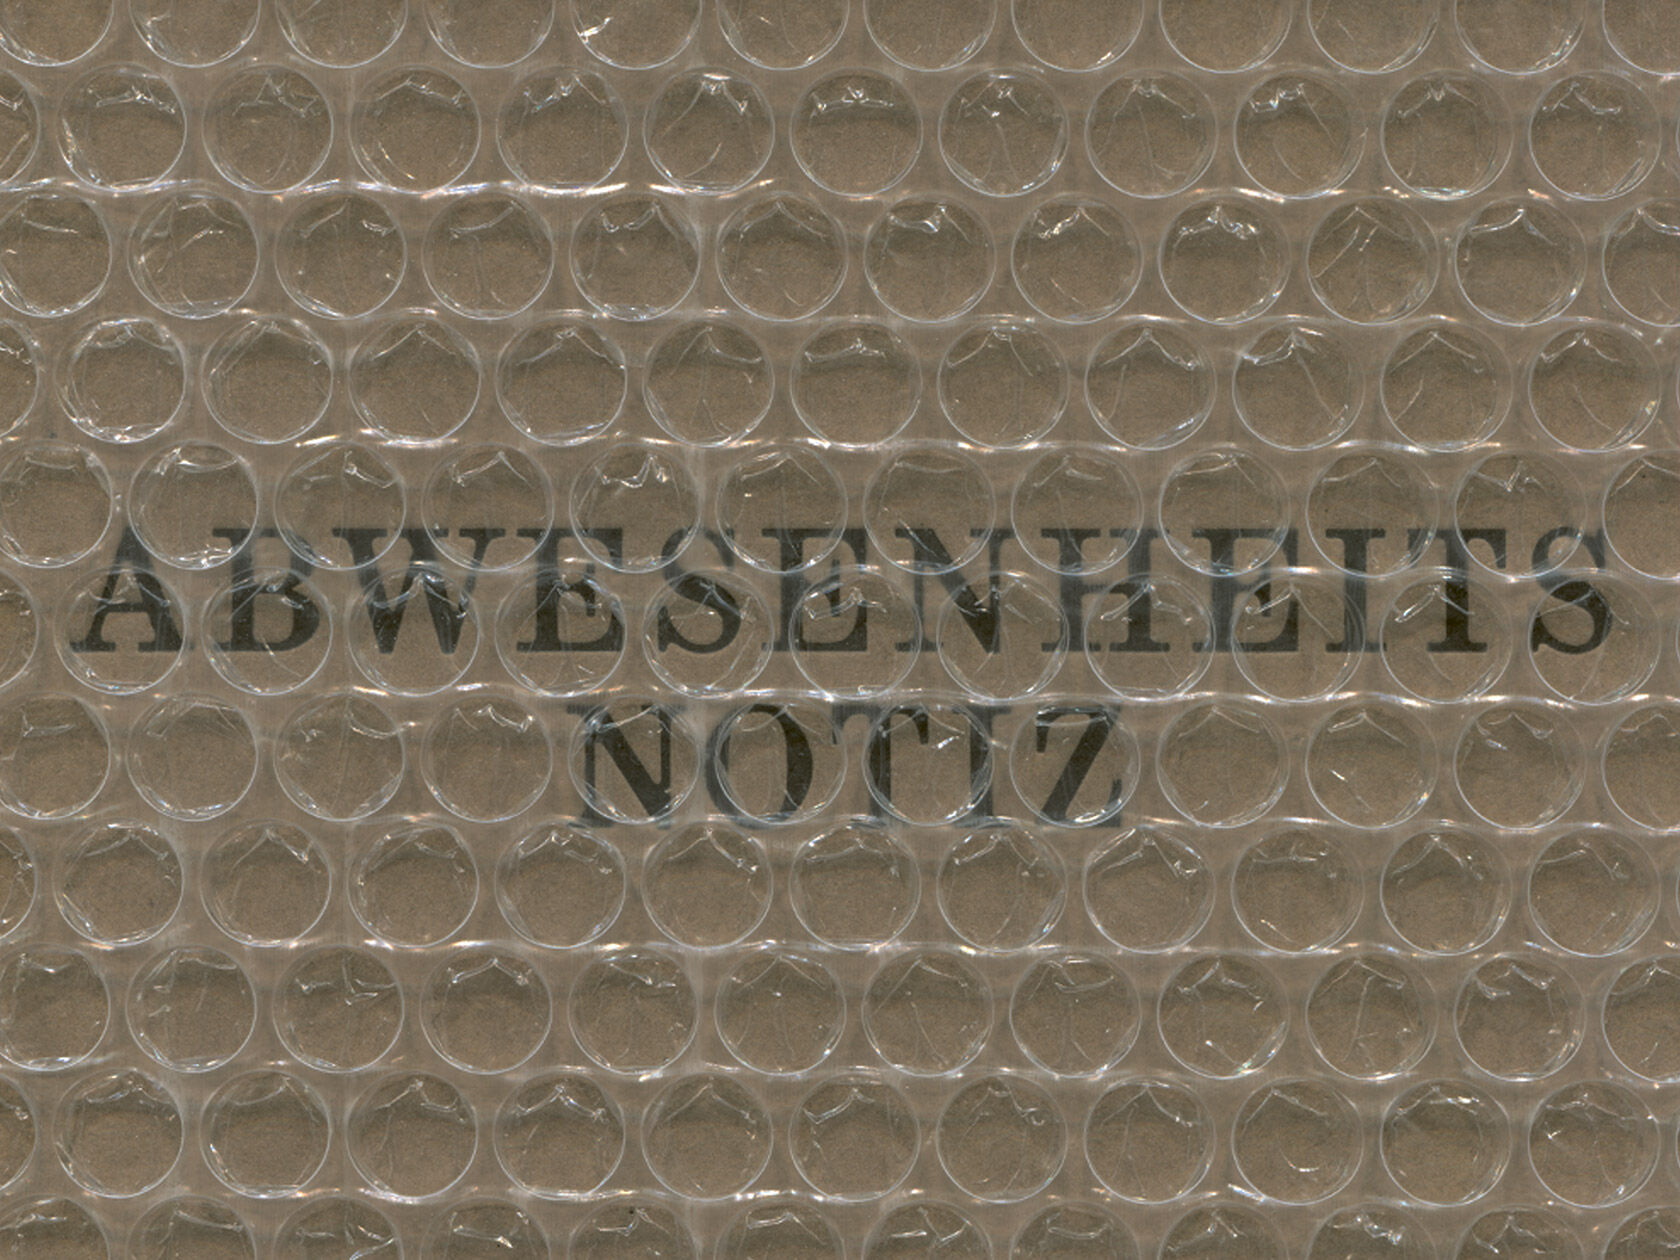 The collaborative publication “Abwesenheitsnotiz” combines photographs of Mascha Dilger with poetry by Celine Radloff